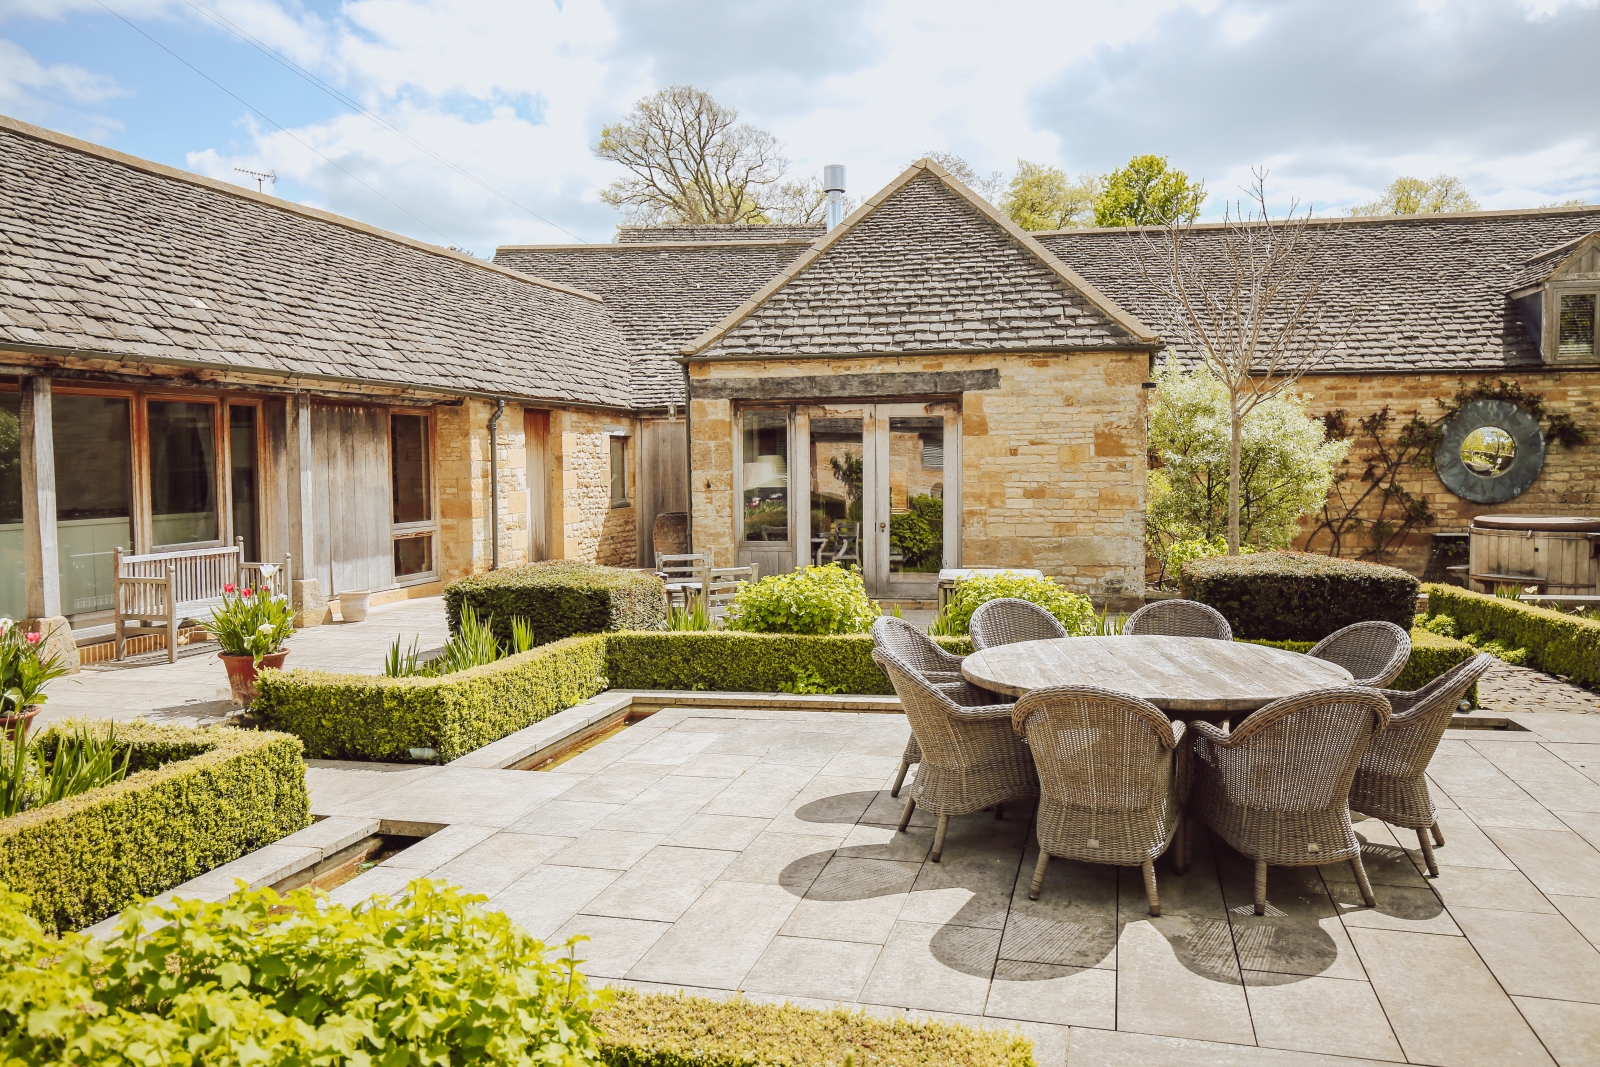 Terrace seating area in the courtyard of Temple Guiting Manor Barn in the Cotswolds, England